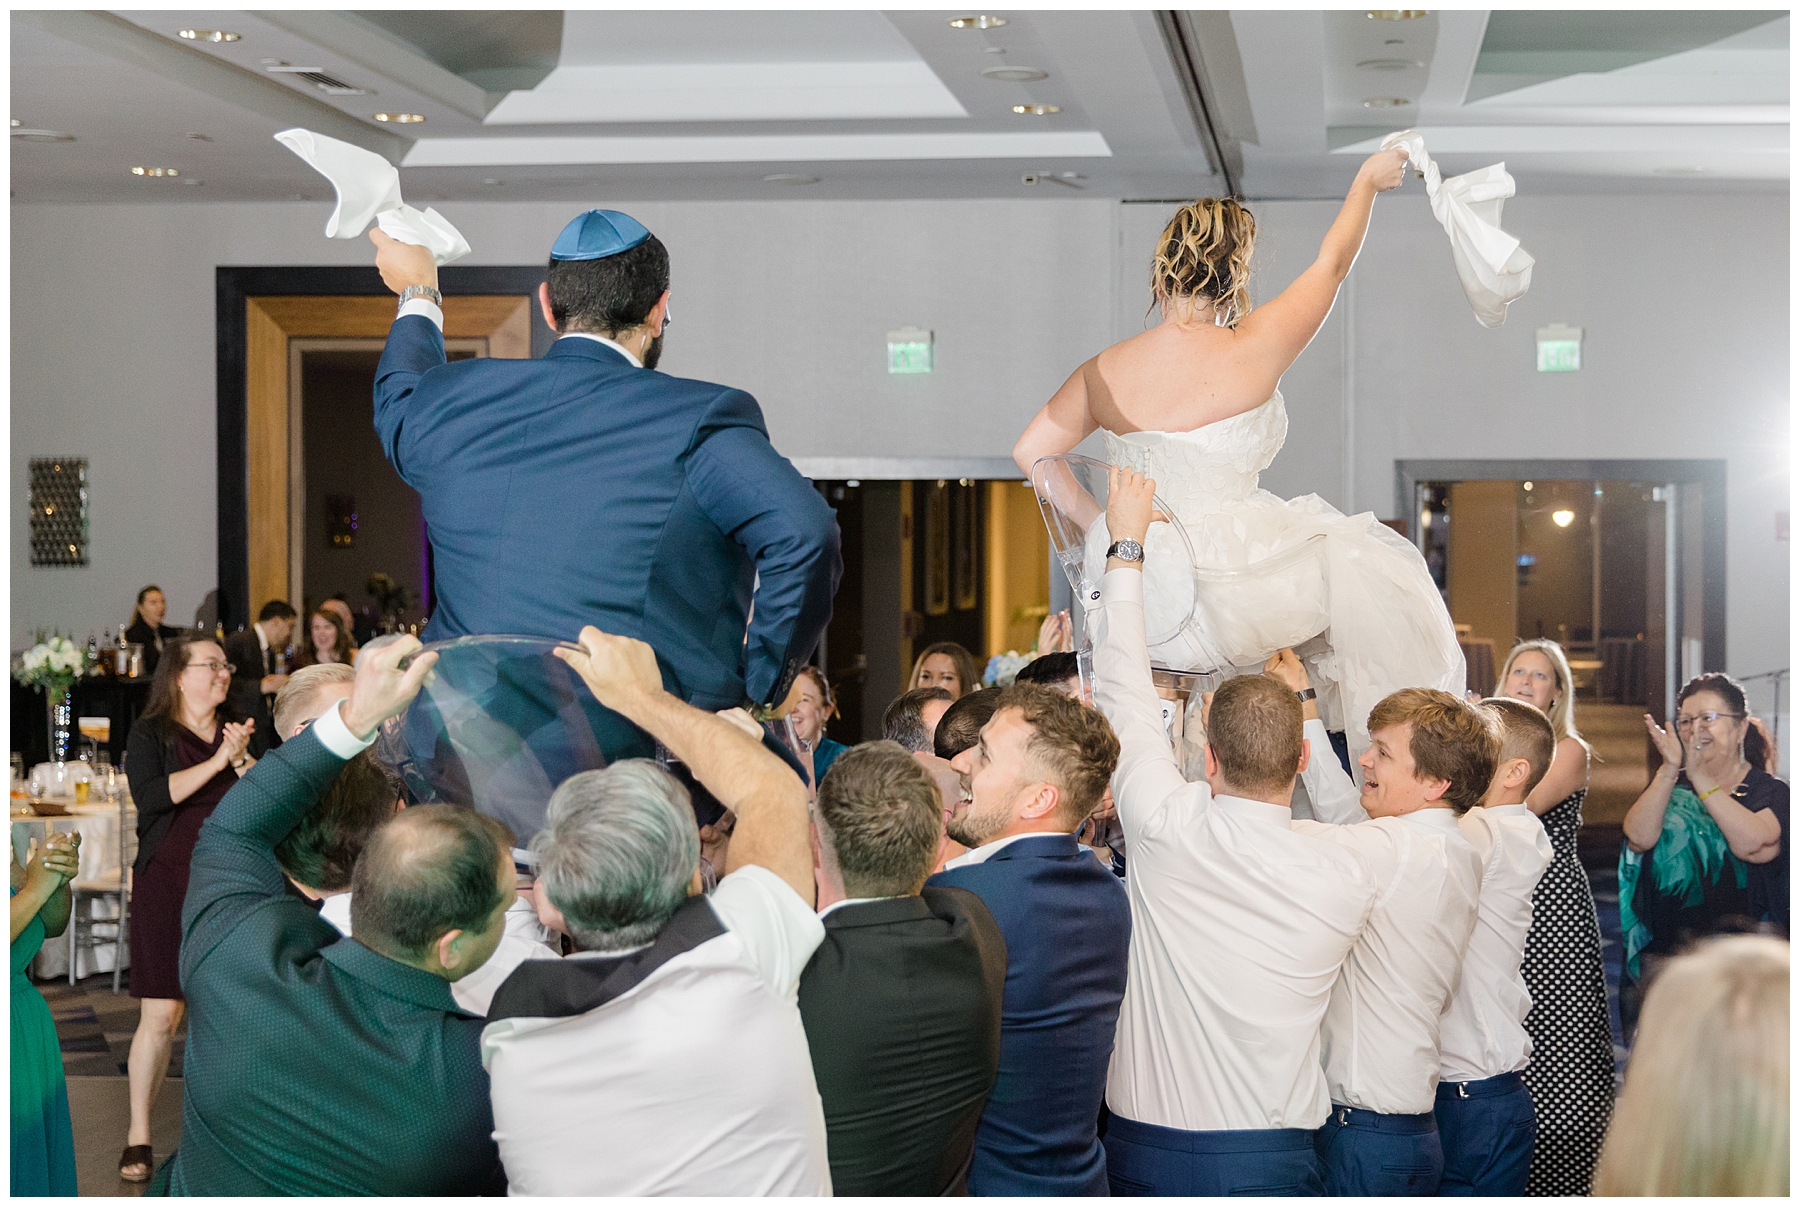 couple during traditional Jewish dance at wedding reception